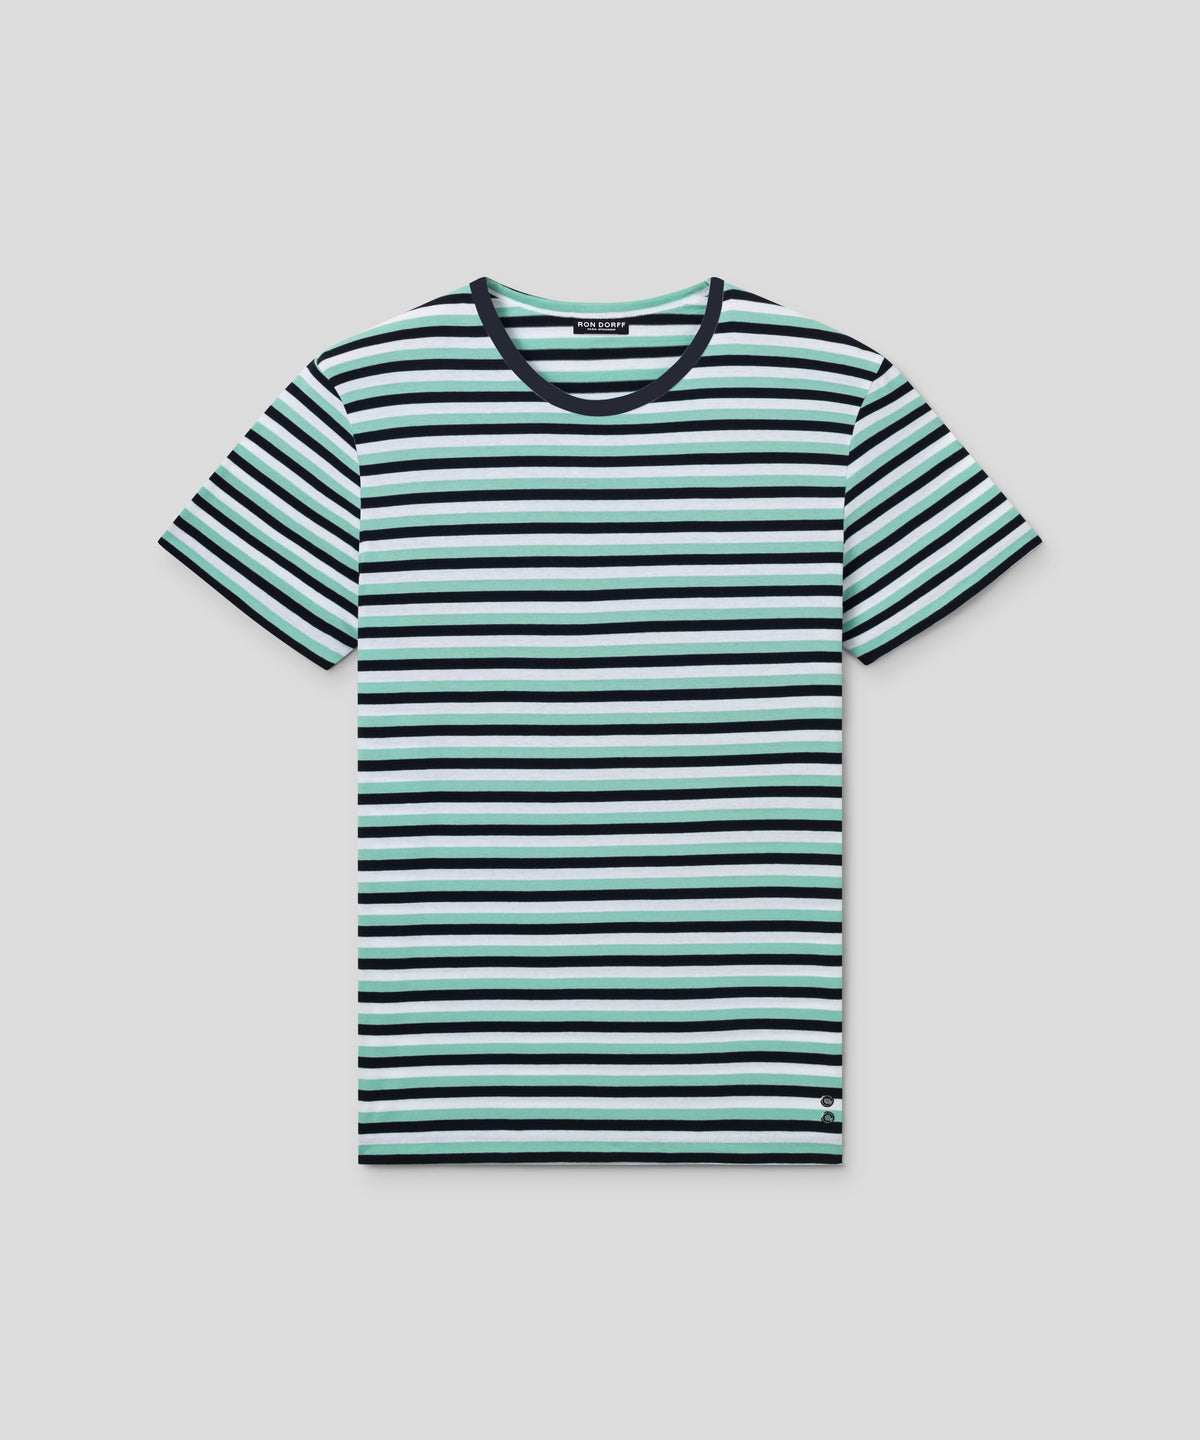 T-Shirt Eyelet Edition w. Tricolor Stripes: Grass Green/Navy/White